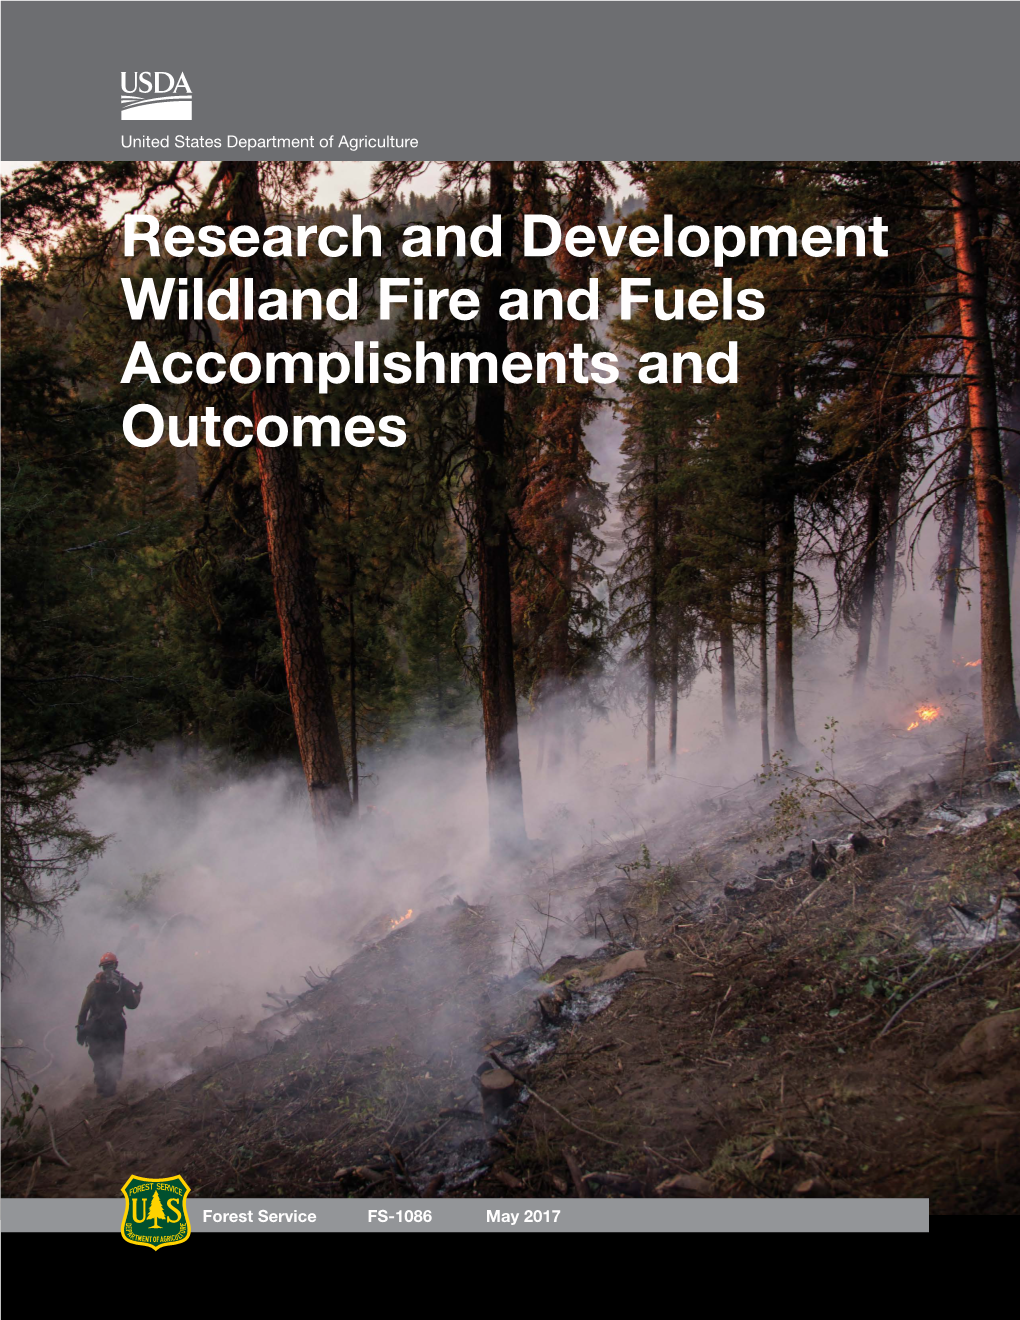 Research and Development Wildland Fire and Fuels Accomplishments and Outcomes